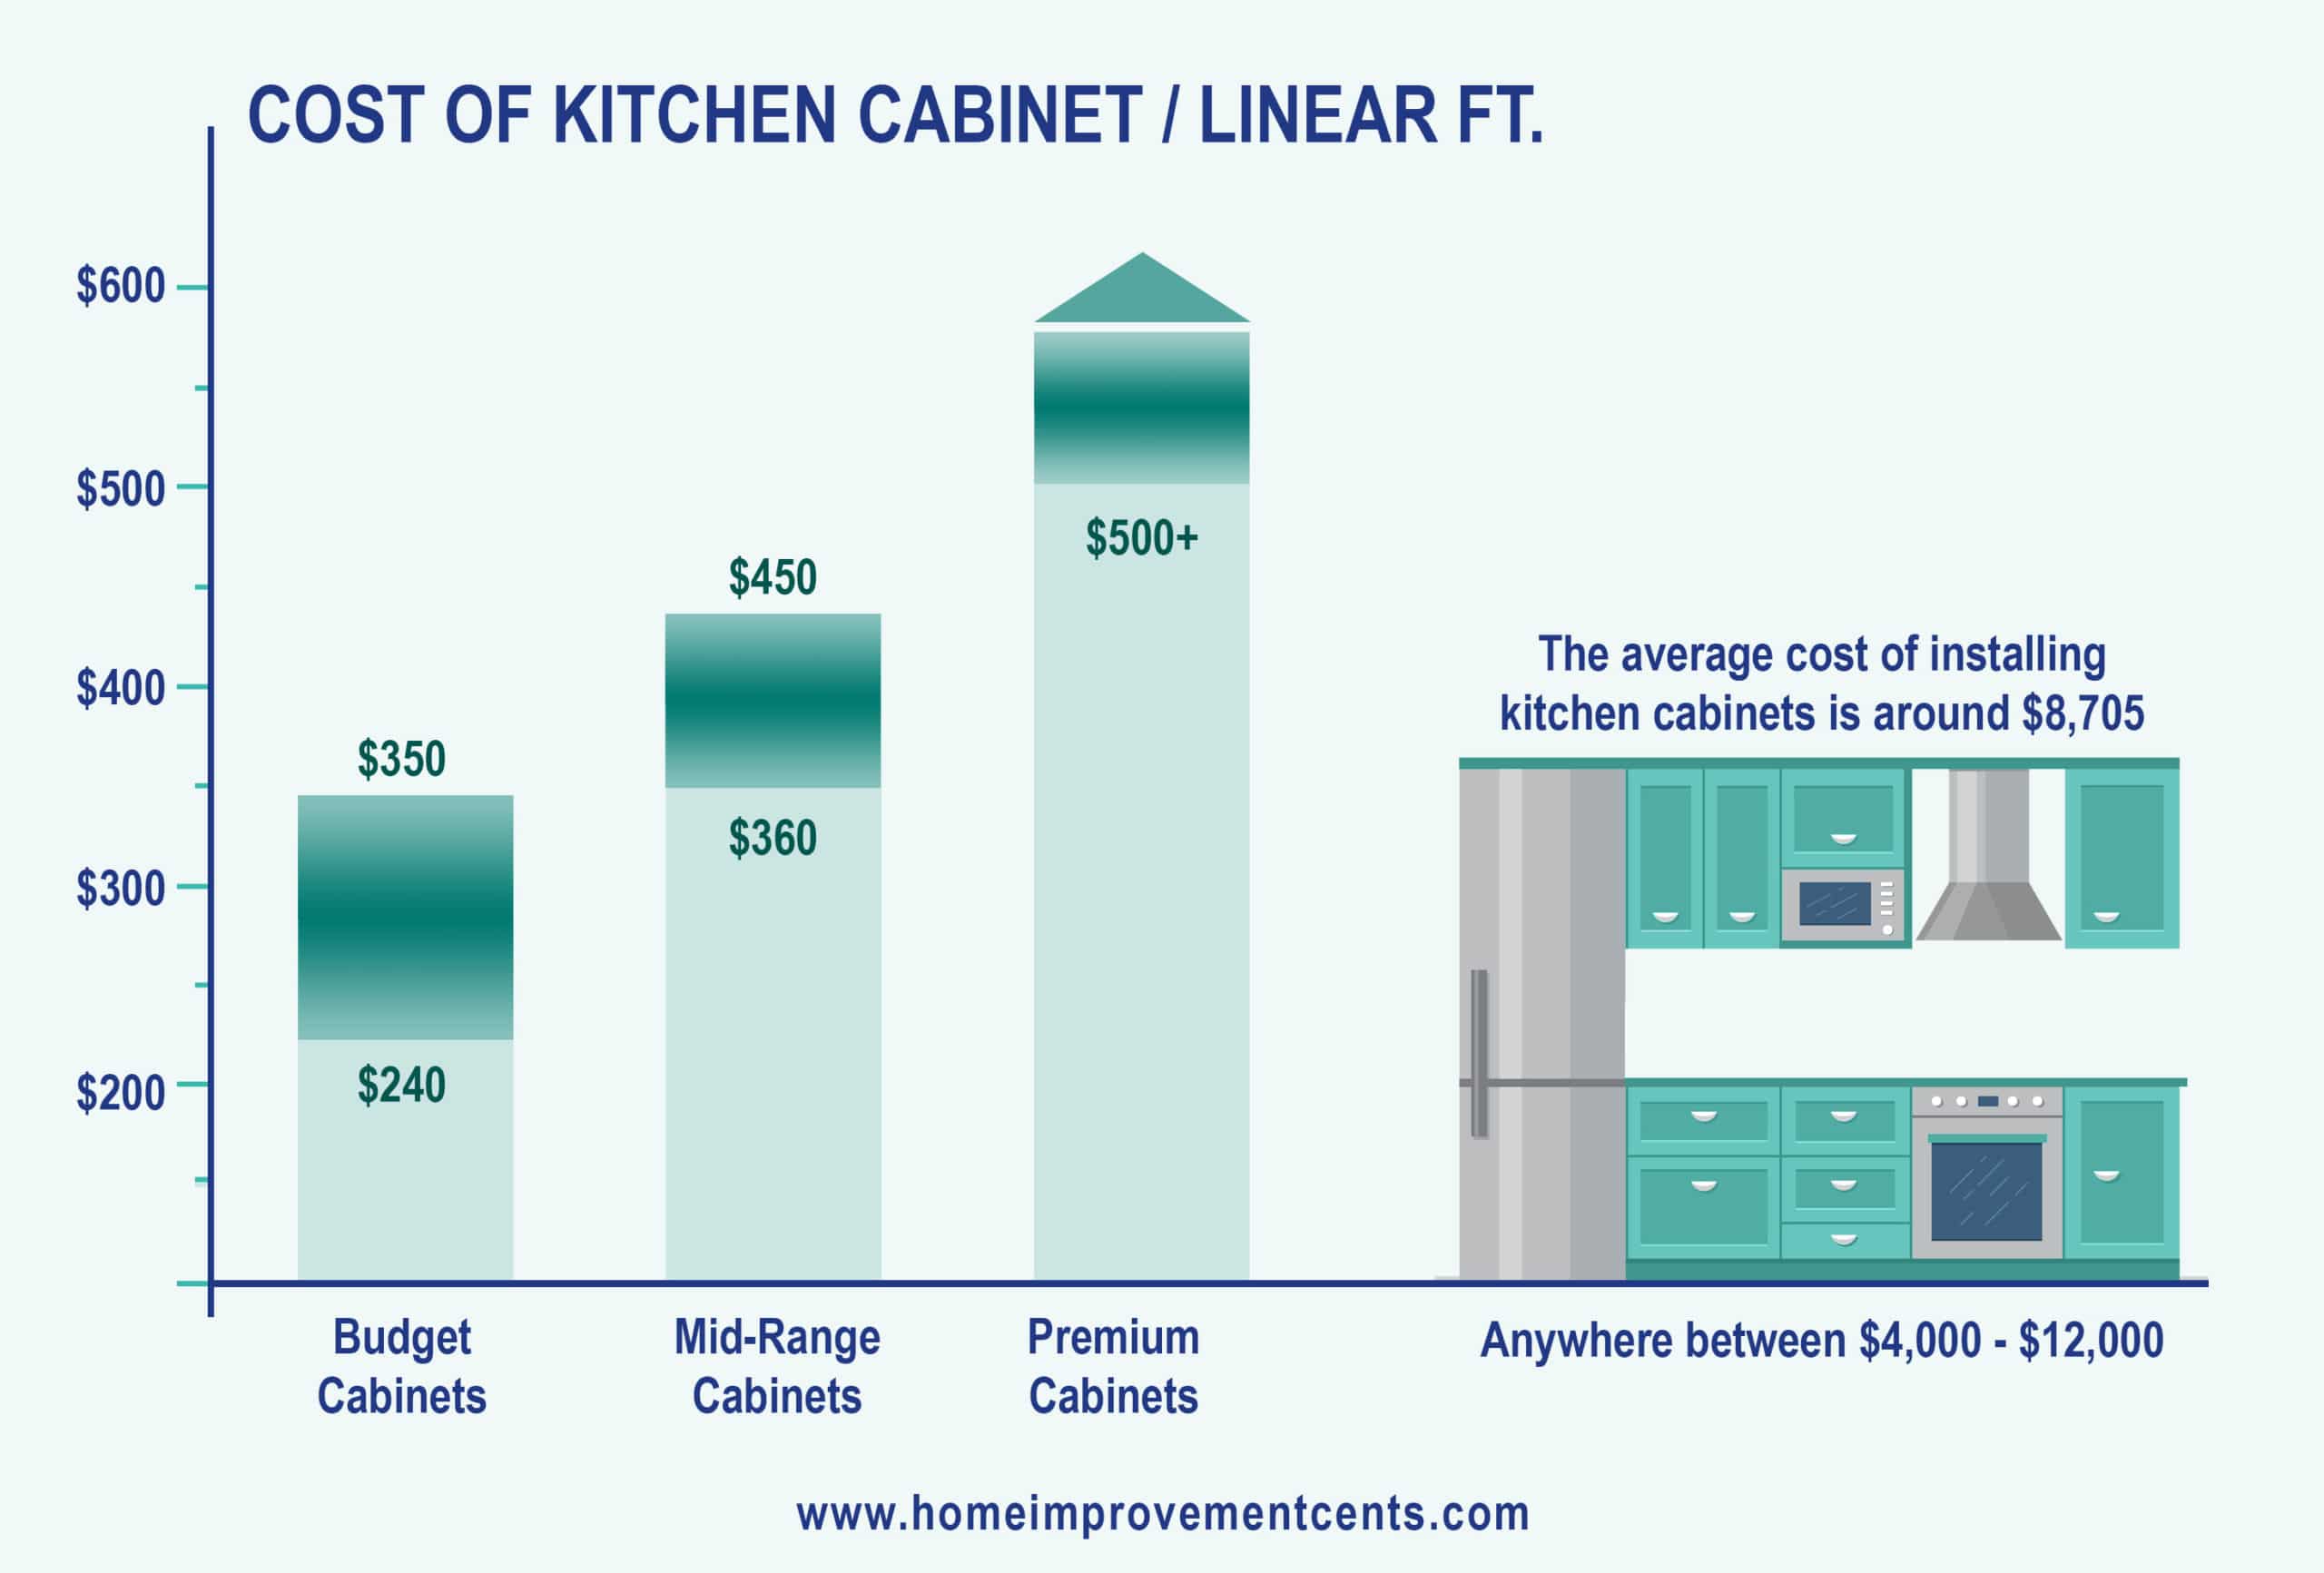 Cost per linear foot of kitchen cabinets with range of quality